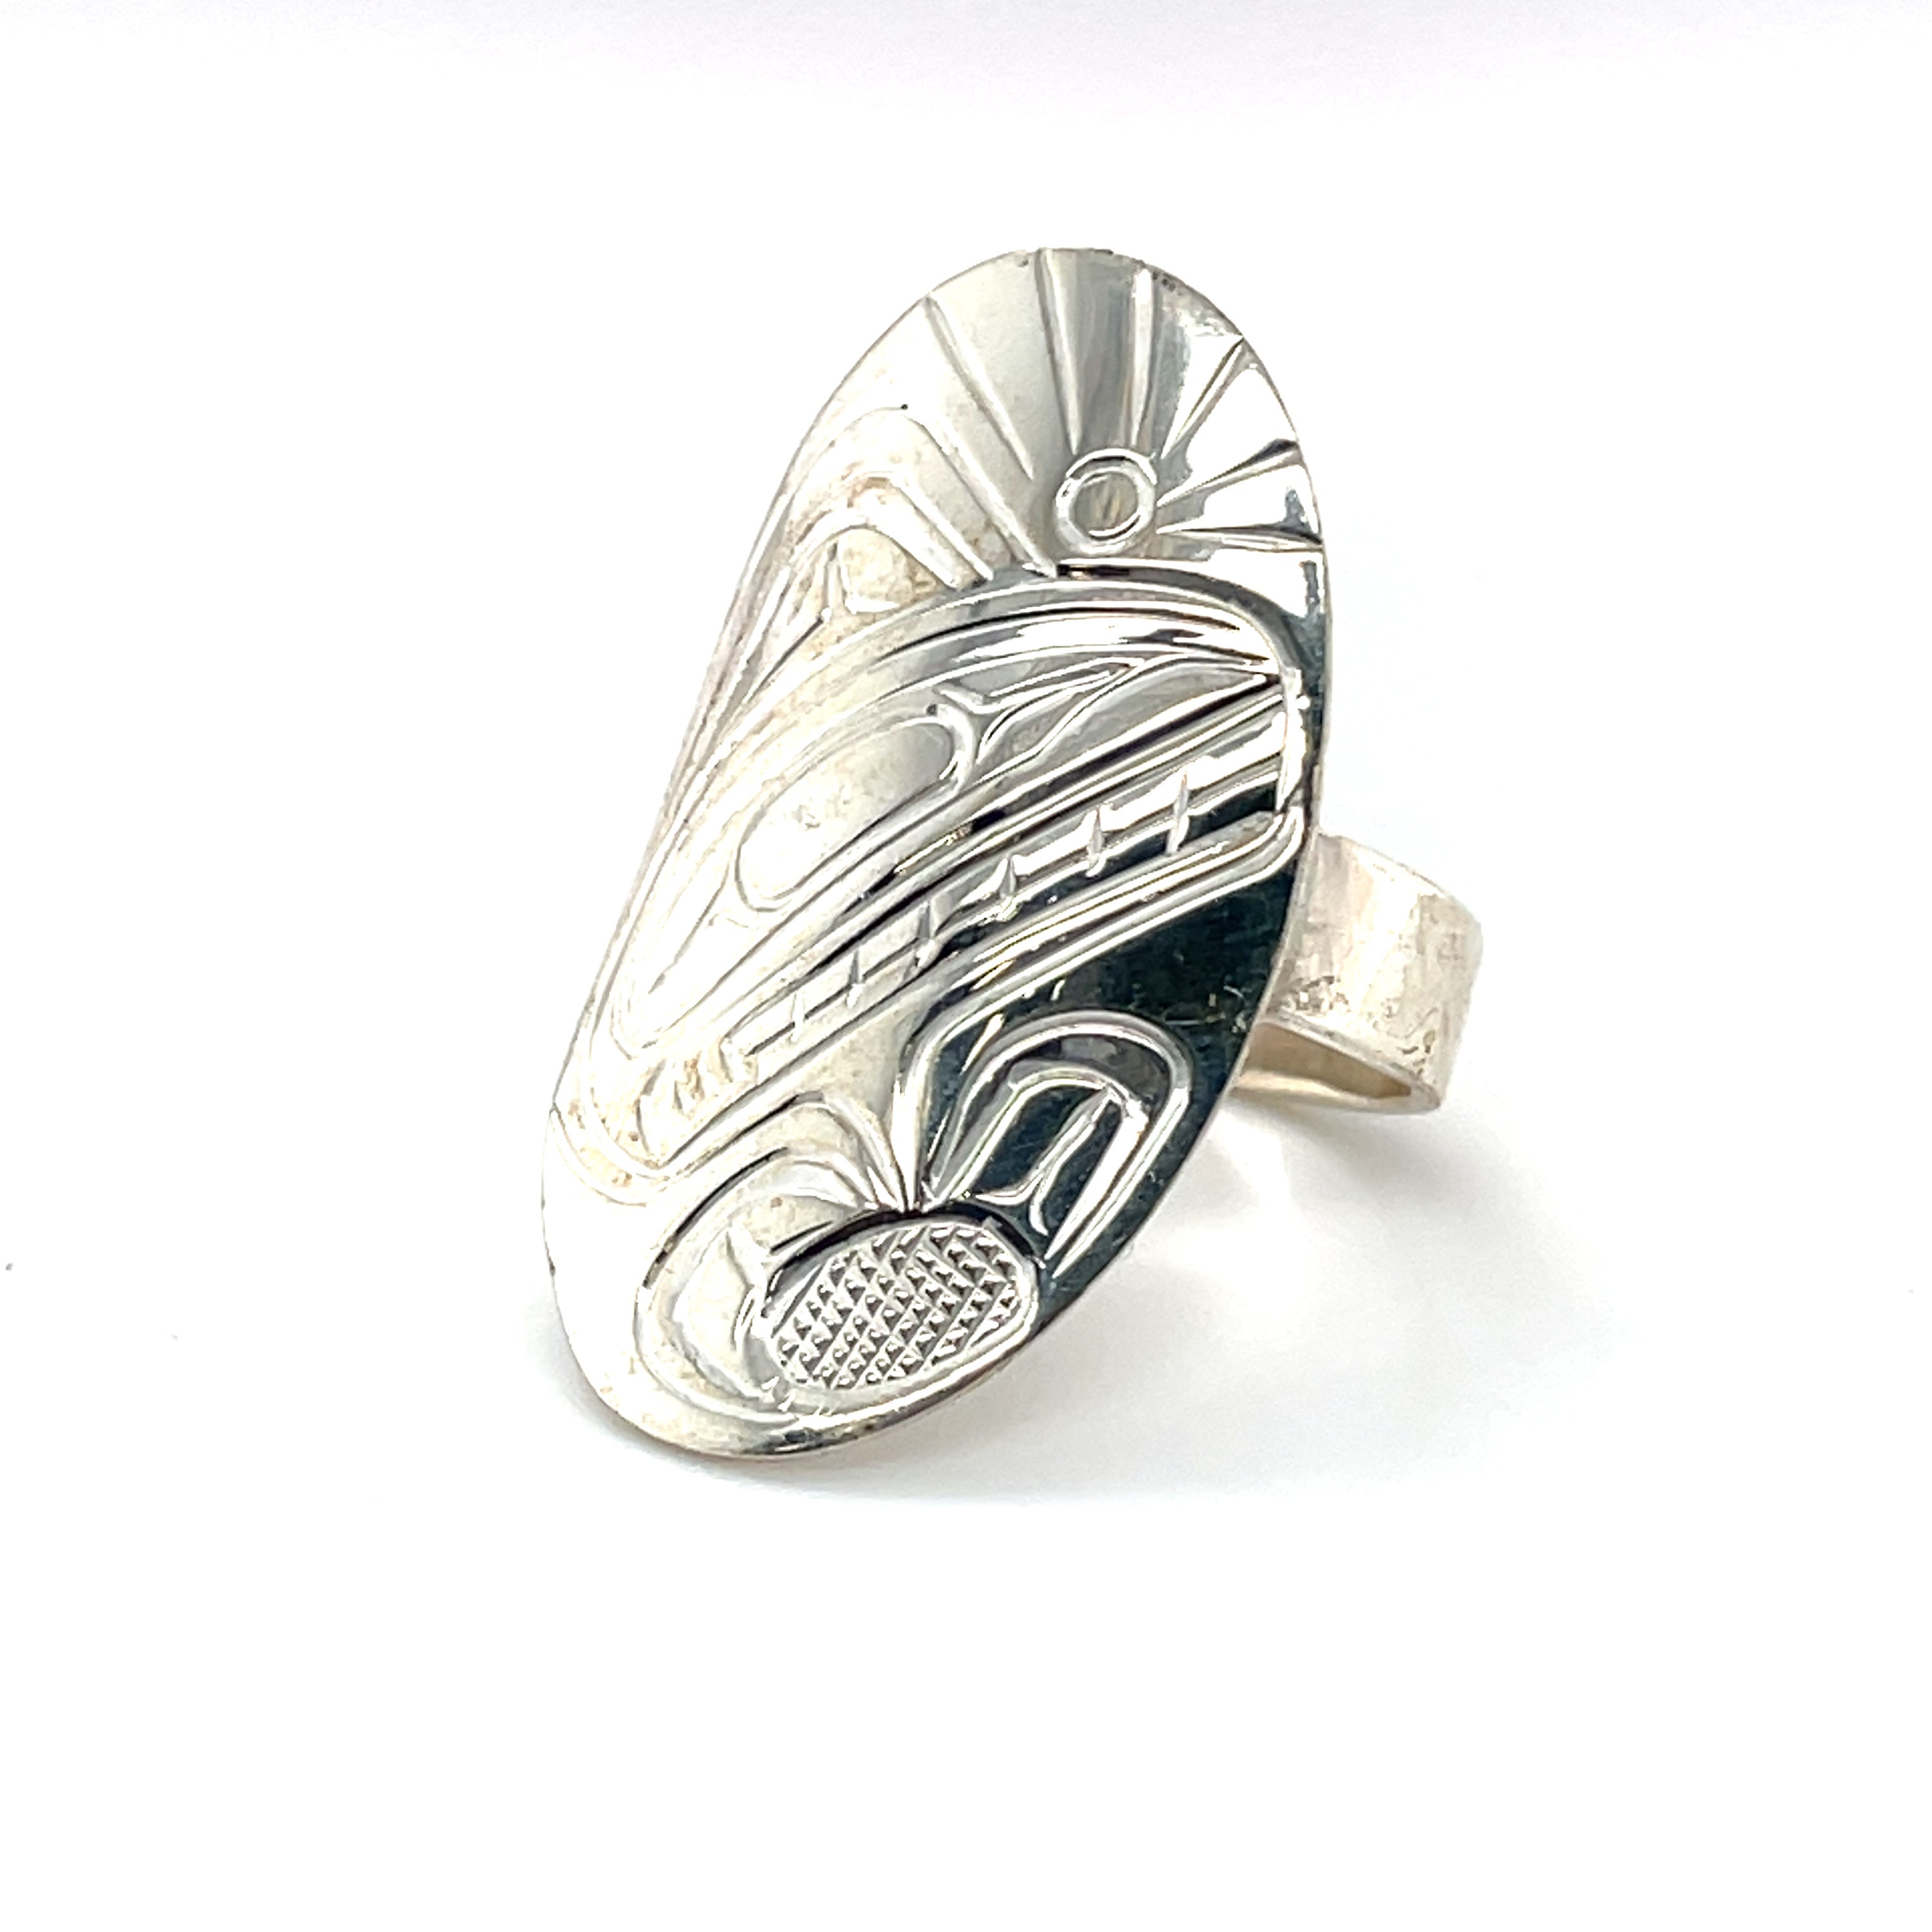 Ring - Sterling Silver - Oval - Orca - size 7.75